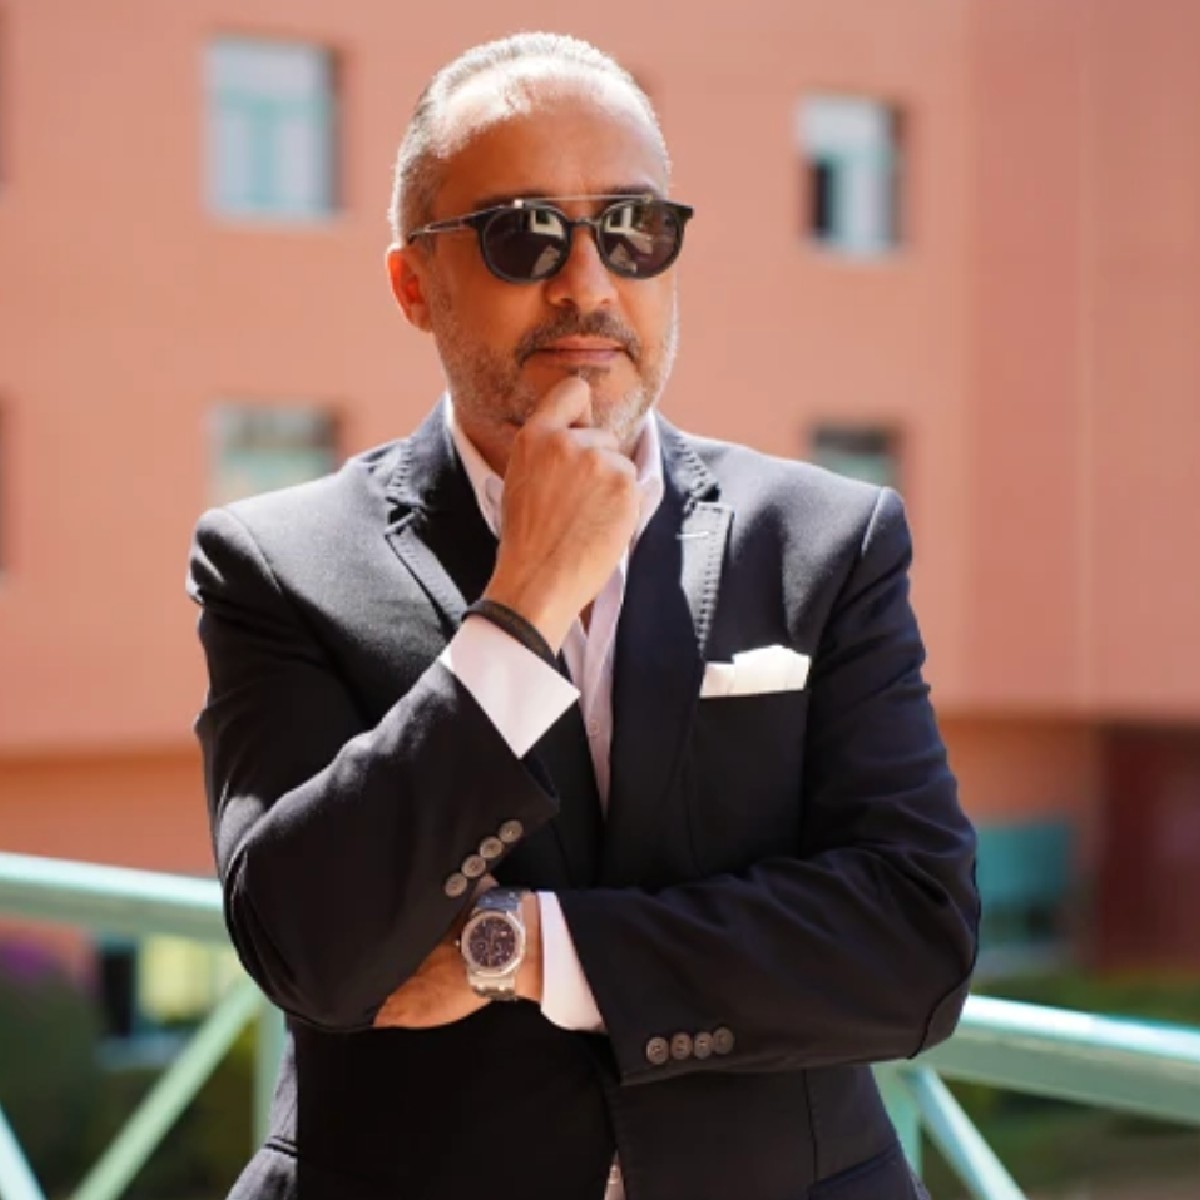 Catch up with Les Roches alumnus Rami Sayess as we explore a jet-setting career in hospitality which has seen him live and work in no fewer than 15 countries, most recently at the prestigious Four Seasons Bahrain Bay 👉 fal.cn/3zSVk #GeneralManager #FourSeasons